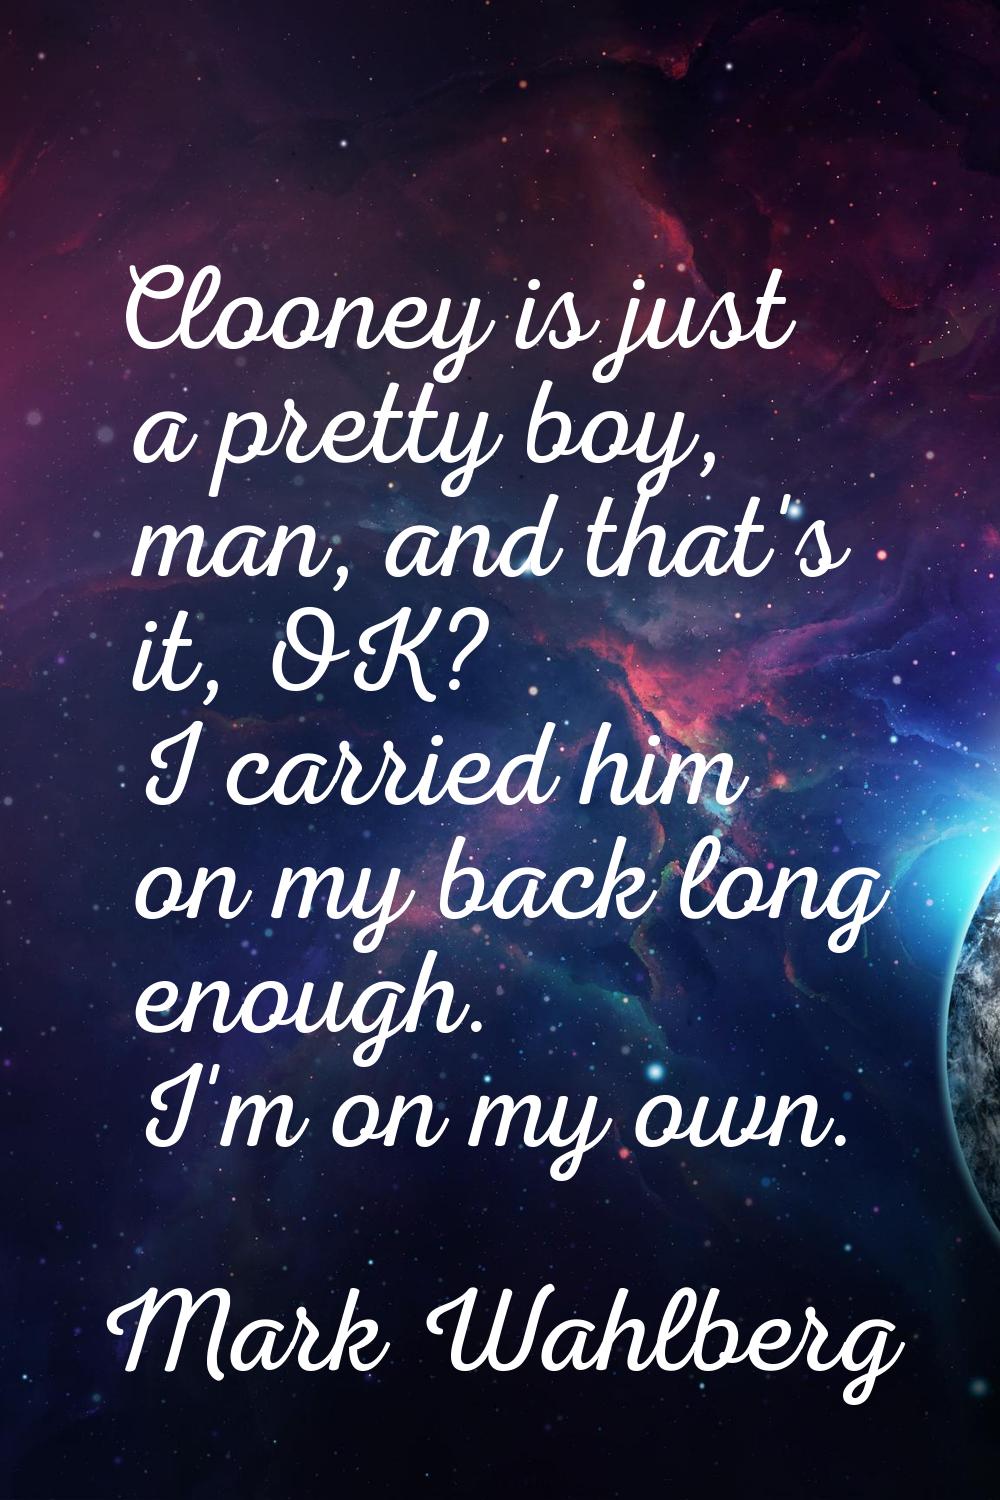 Clooney is just a pretty boy, man, and that's it, OK? I carried him on my back long enough. I'm on 